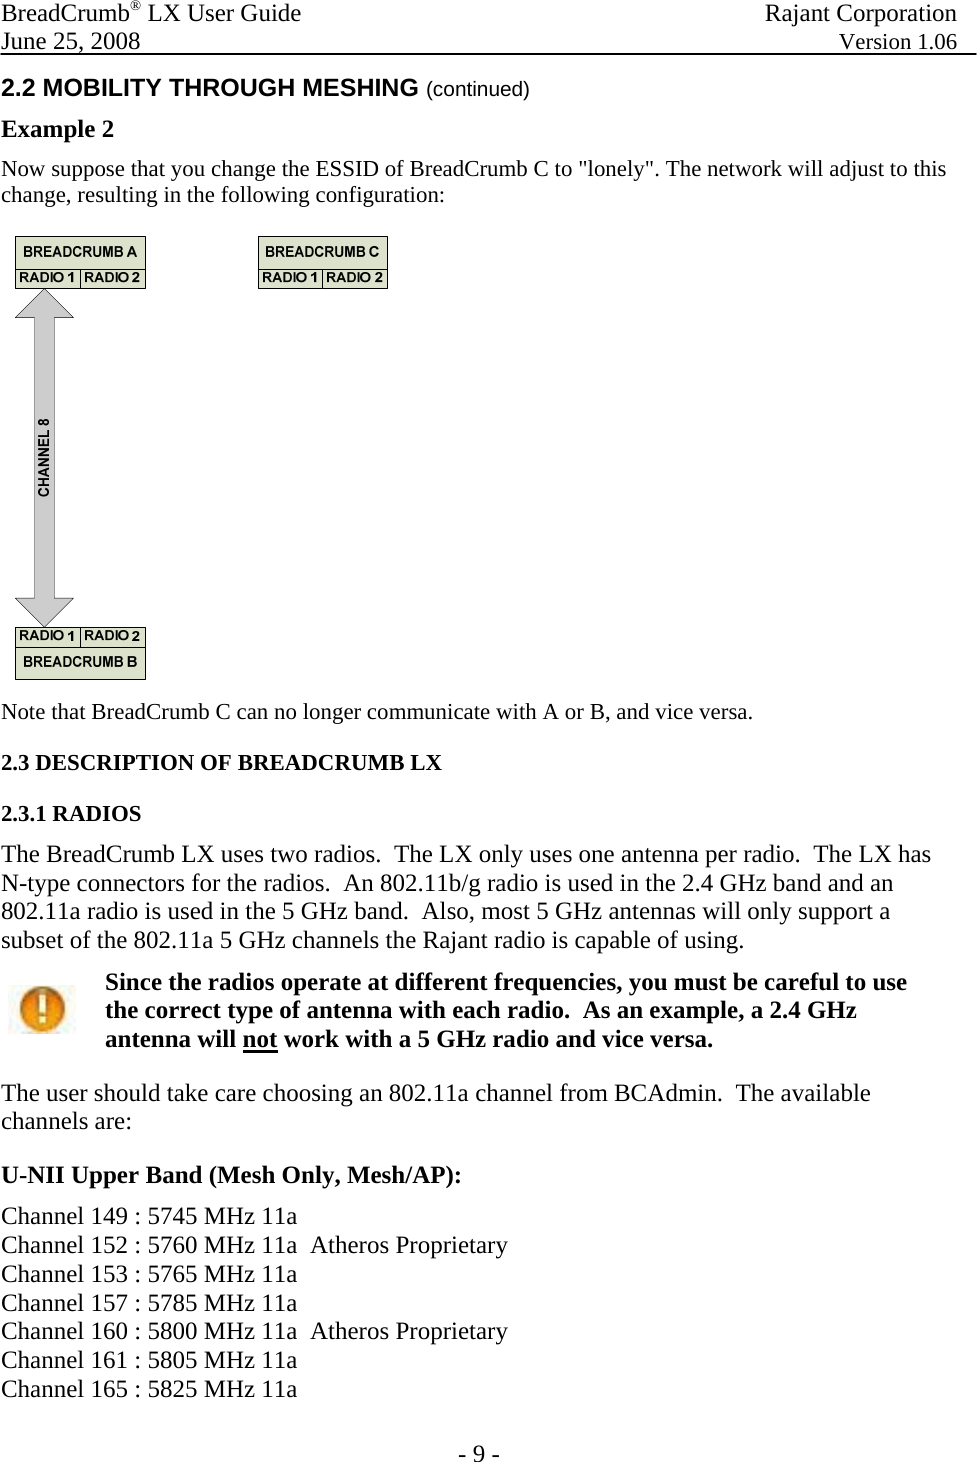 BreadCrumb® LX User Guide  Rajant Corporation  June 25, 2008  Version 1.06 - 9 - 2.2 MOBILITY THROUGH MESHING (continued) Example 2  Now suppose that you change the ESSID of BreadCrumb C to &quot;lonely&quot;. The network will adjust to this change, resulting in the following configuration:  Note that BreadCrumb C can no longer communicate with A or B, and vice versa. 2.3 DESCRIPTION OF BREADCRUMB LX 2.3.1 RADIOS The BreadCrumb LX uses two radios.  The LX only uses one antenna per radio.  The LX has N-type connectors for the radios.  An 802.11b/g radio is used in the 2.4 GHz band and an 802.11a radio is used in the 5 GHz band.  Also, most 5 GHz antennas will only support a subset of the 802.11a 5 GHz channels the Rajant radio is capable of using.  Since the radios operate at different frequencies, you must be careful to use the correct type of antenna with each radio.  As an example, a 2.4 GHz antenna will not work with a 5 GHz radio and vice versa. The user should take care choosing an 802.11a channel from BCAdmin.  The available channels are: U-NII Upper Band (Mesh Only, Mesh/AP): Channel 149 : 5745 MHz 11a Channel 152 : 5760 MHz 11a  Atheros Proprietary Channel 153 : 5765 MHz 11a  Channel 157 : 5785 MHz 11a Channel 160 : 5800 MHz 11a  Atheros Proprietary Channel 161 : 5805 MHz 11a  Channel 165 : 5825 MHz 11a 